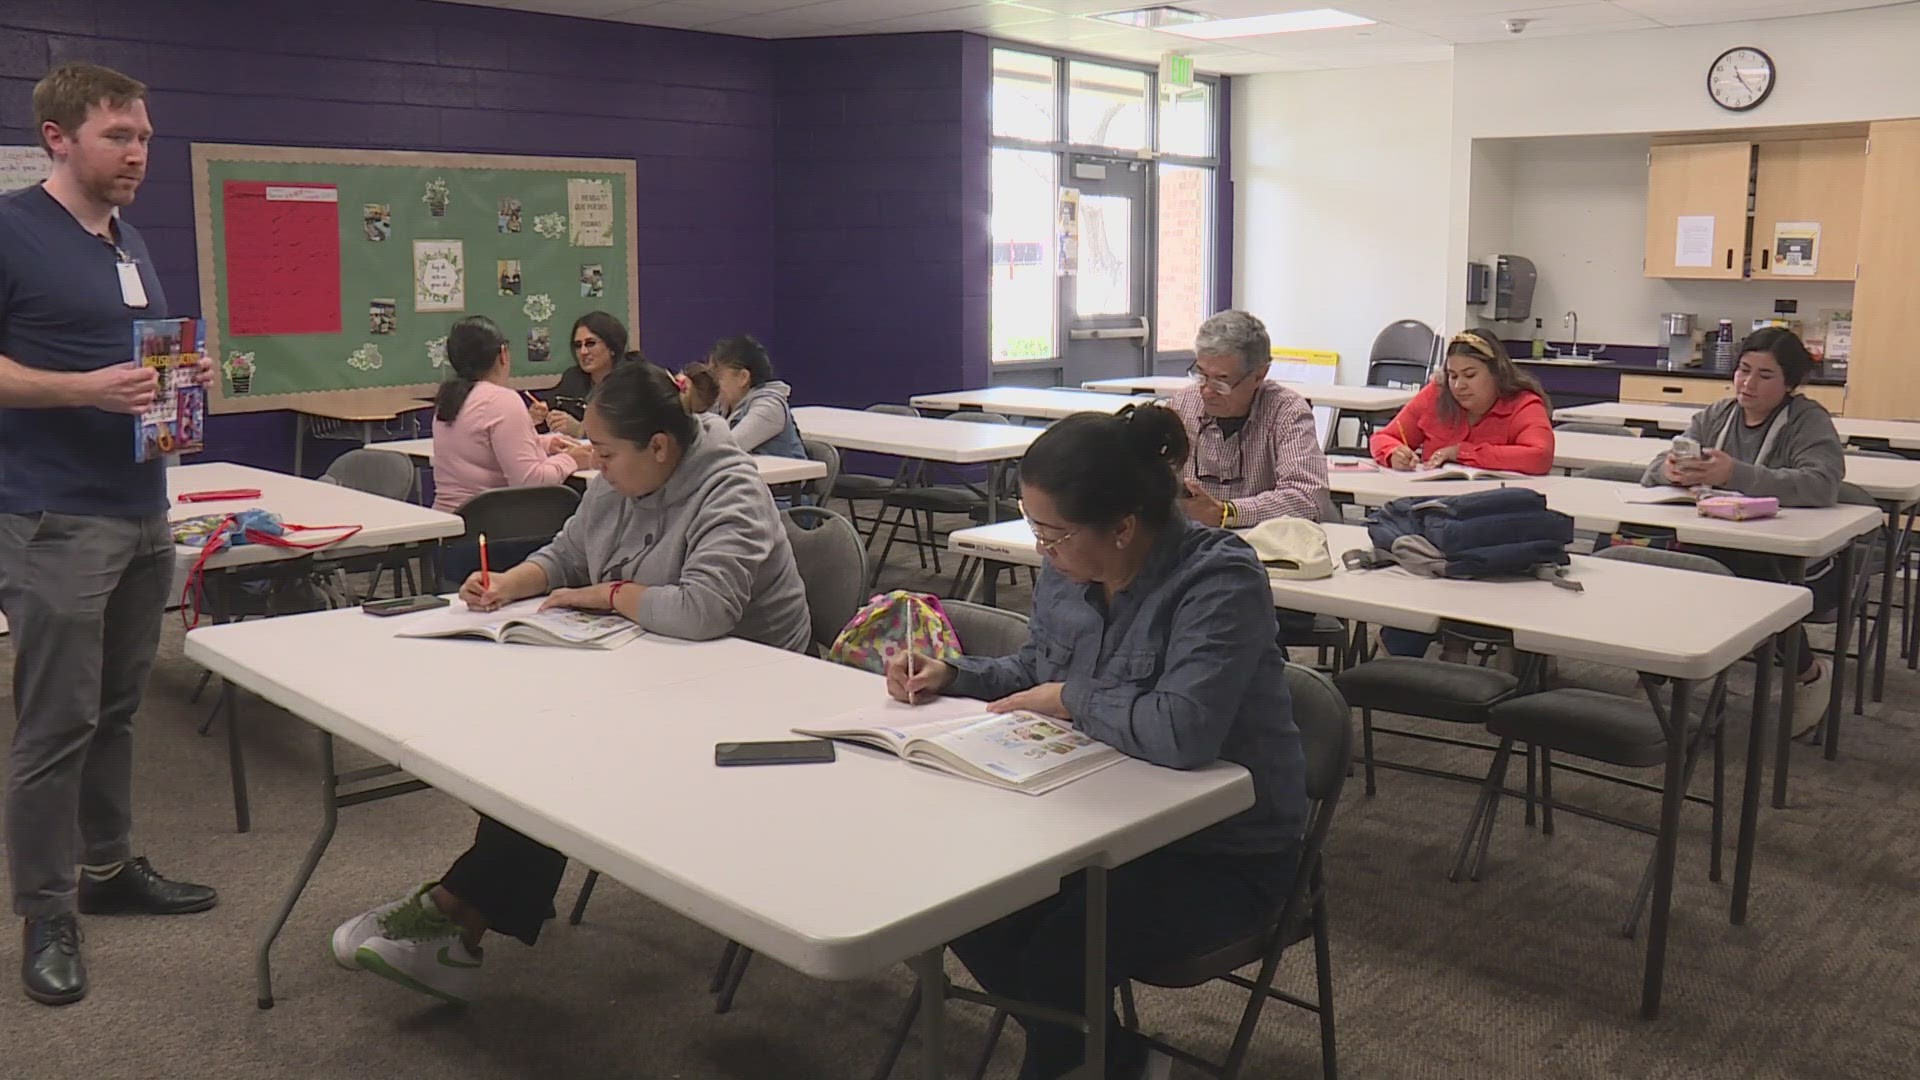 Denver Public Schools is seeing rising interest from adults in taking English as a Second Language classes, with more than 650 adults currently enrolled.